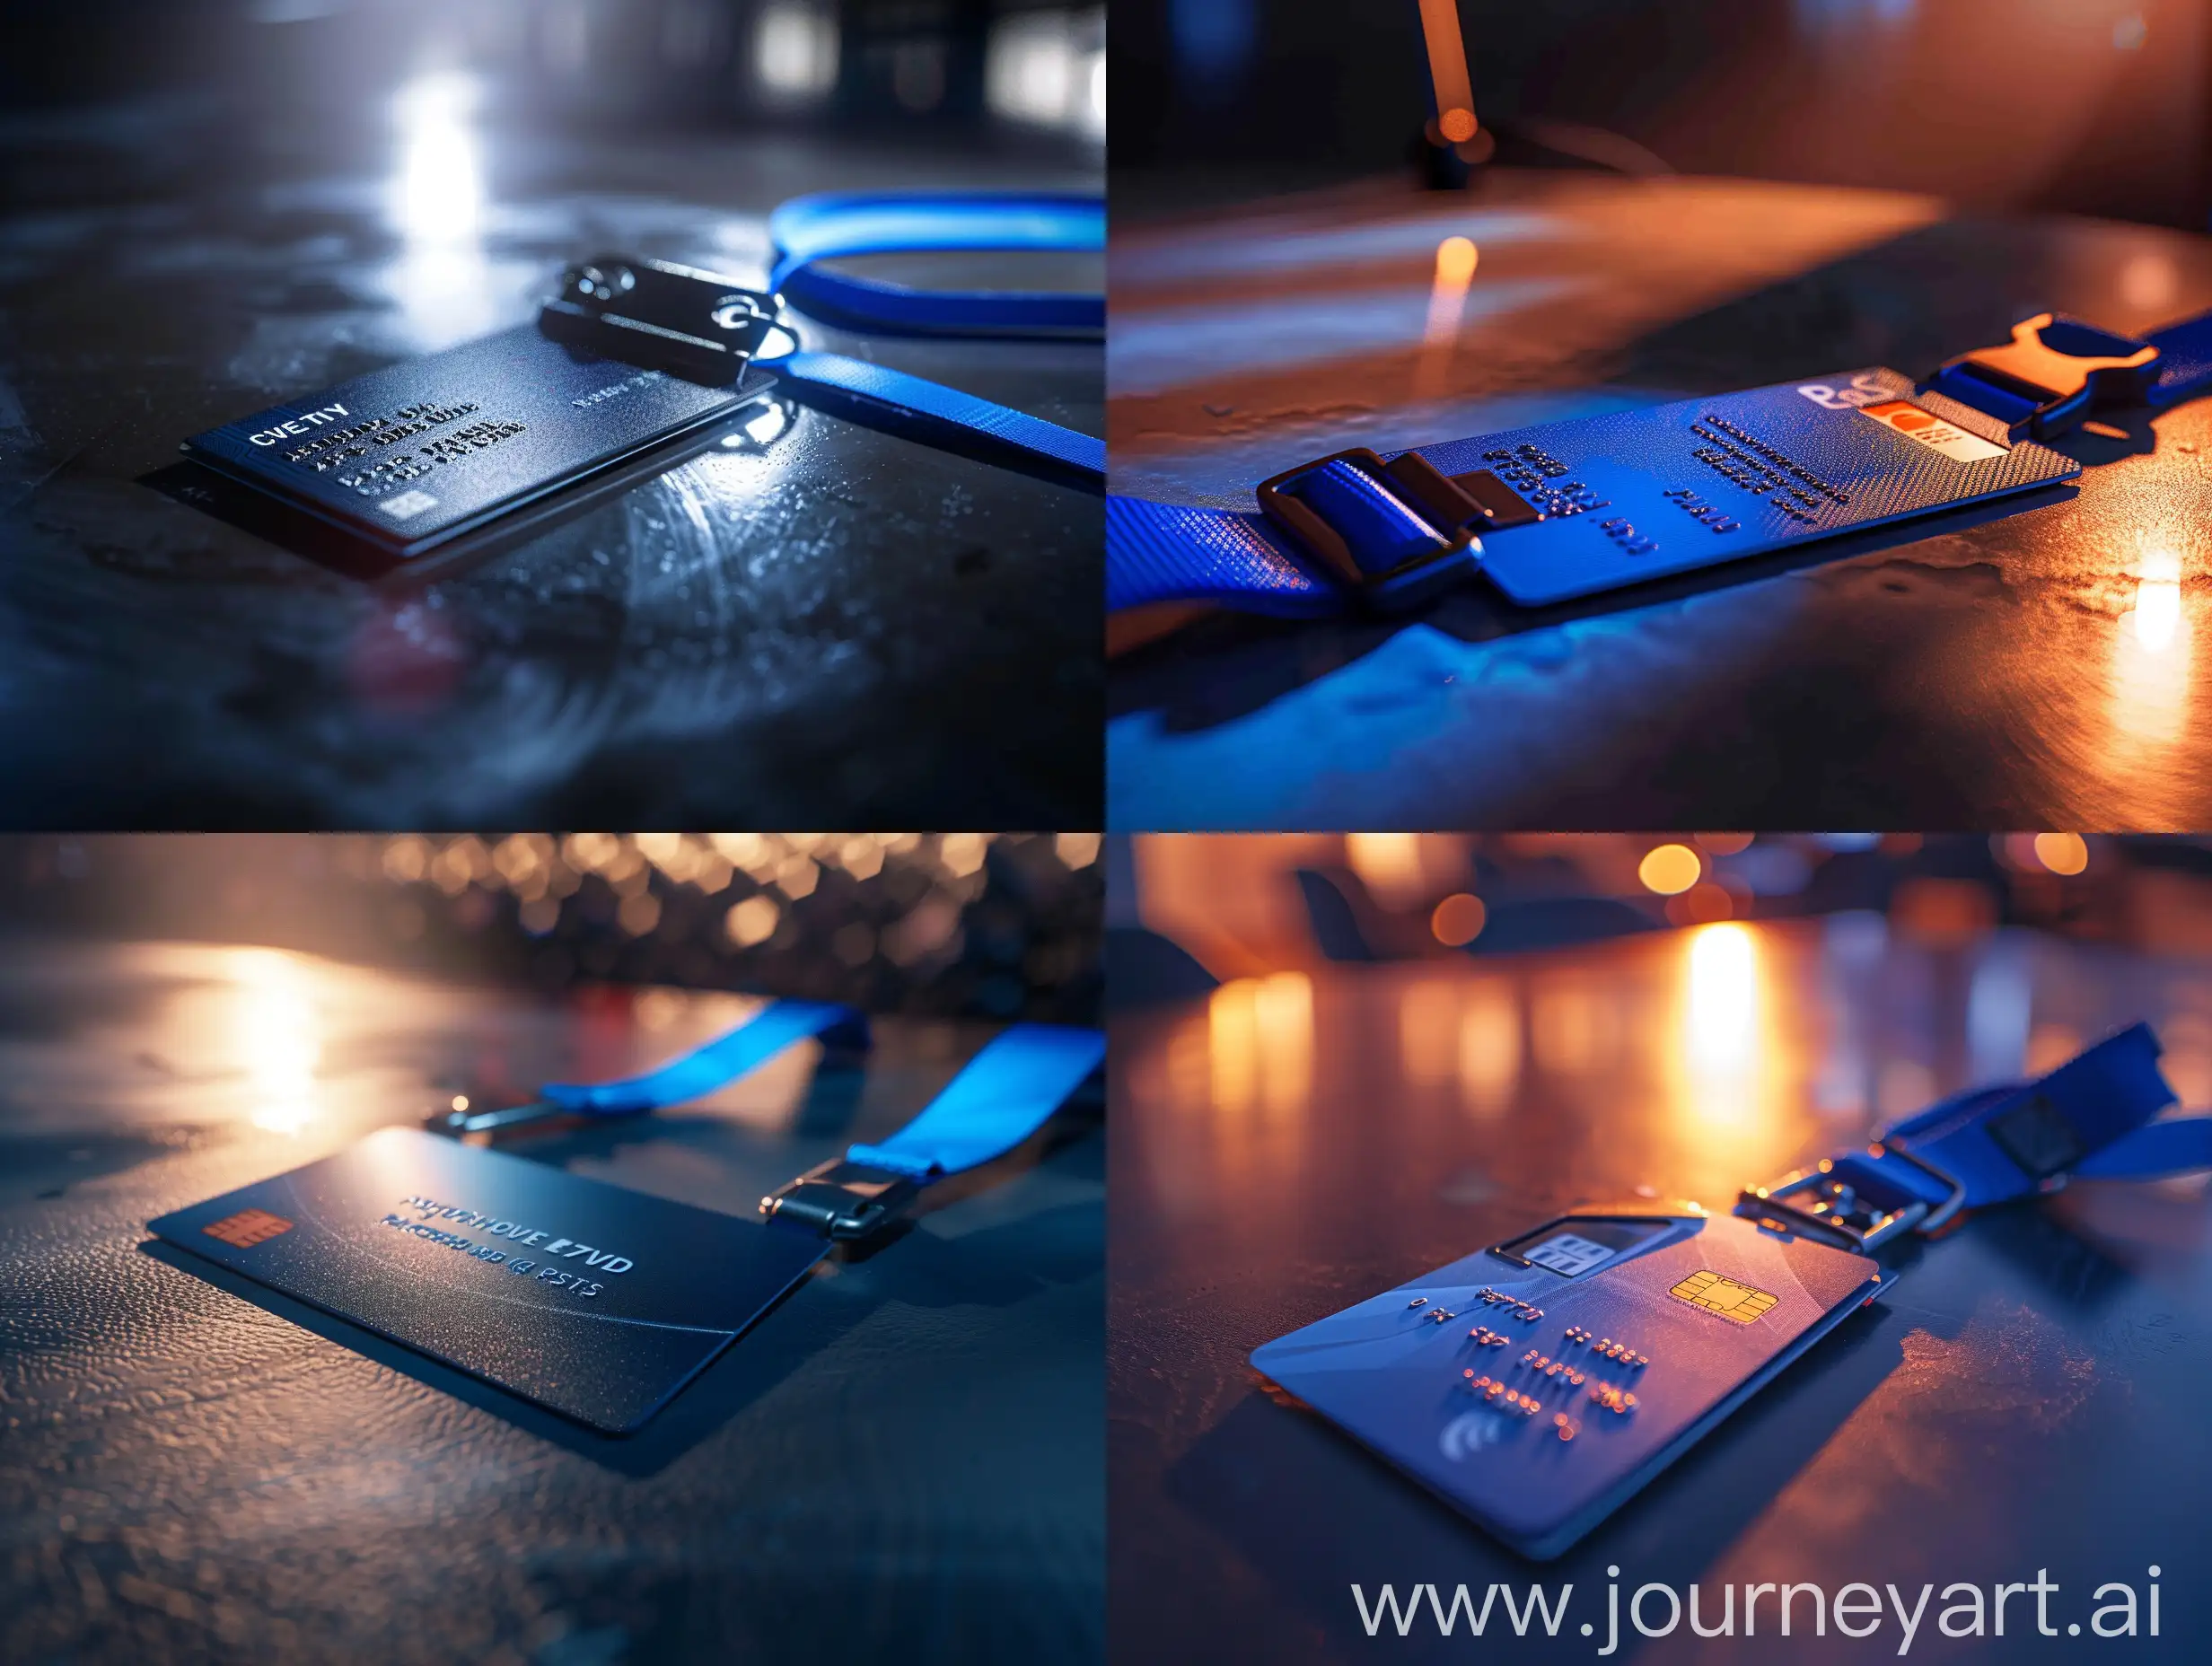 Detailed-PVC-Card-with-Blue-Strap-on-Table-in-Dramatic-Lighting